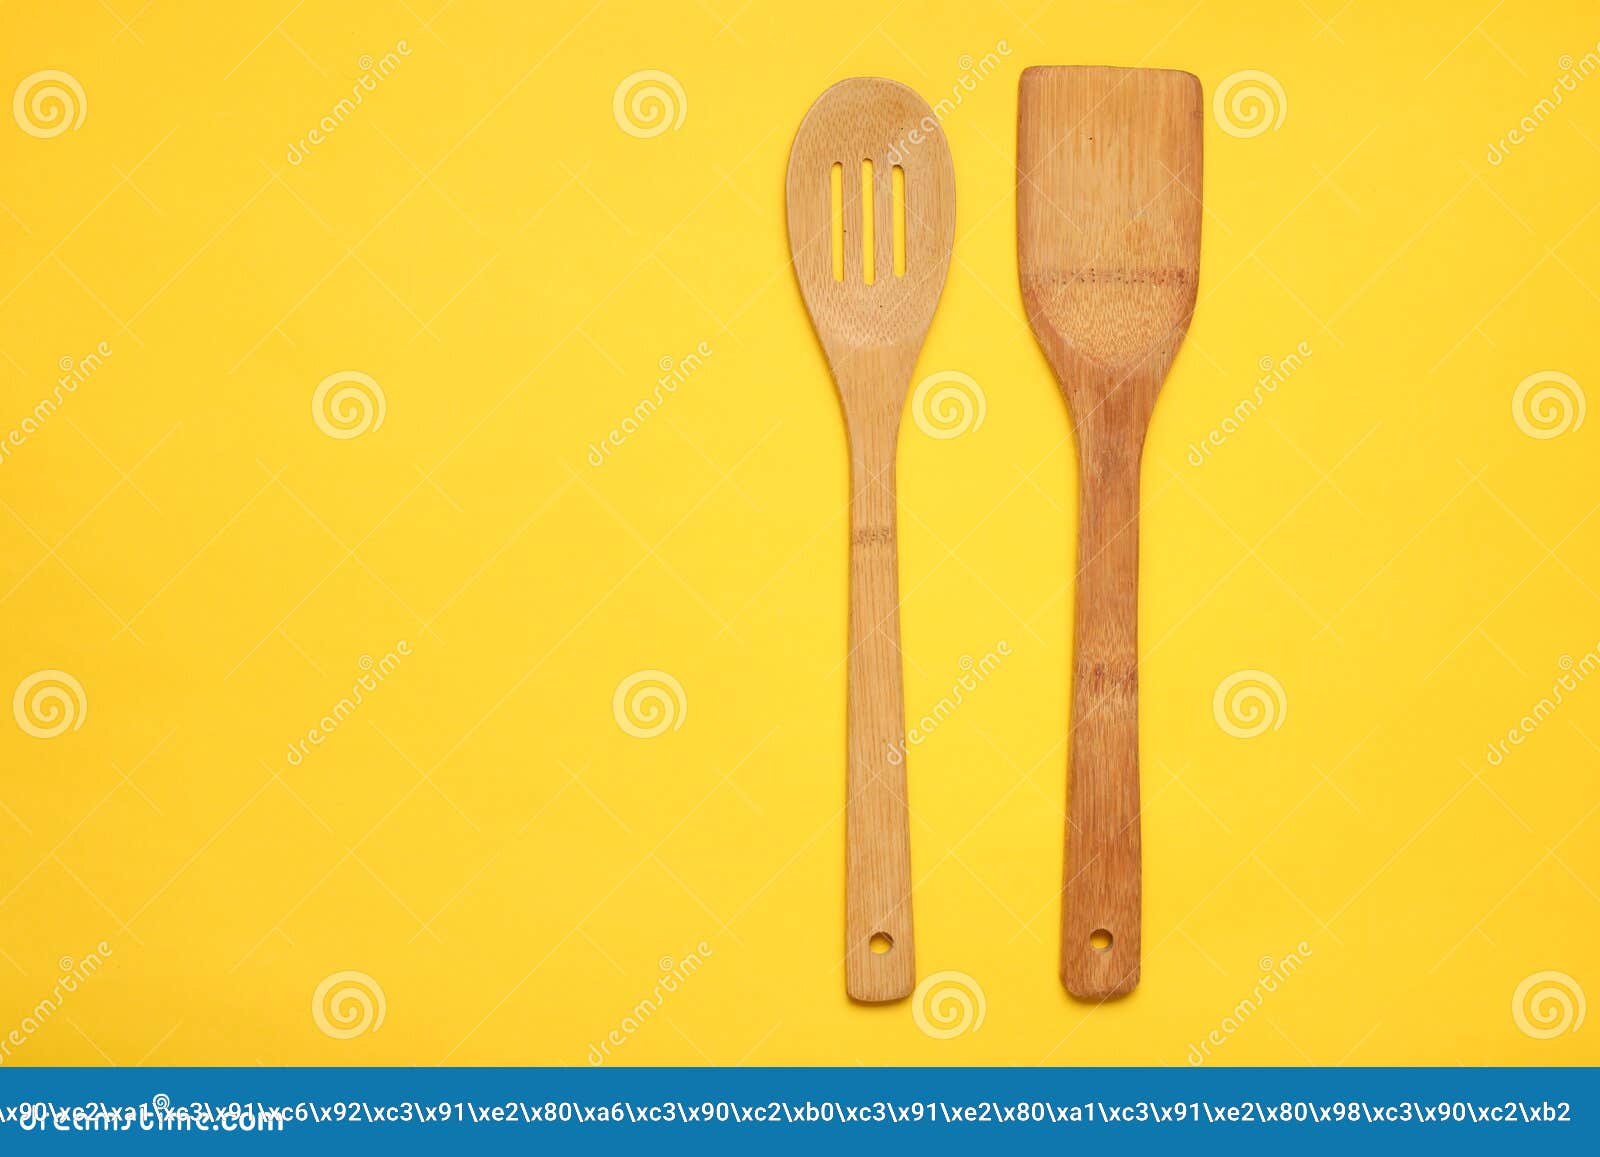 Download Wooden Spatula For Cooking On A Yellow Background Kitchen Concept Minimalism Stock Photo Image Of Culinary Closeup 136761340 Yellowimages Mockups